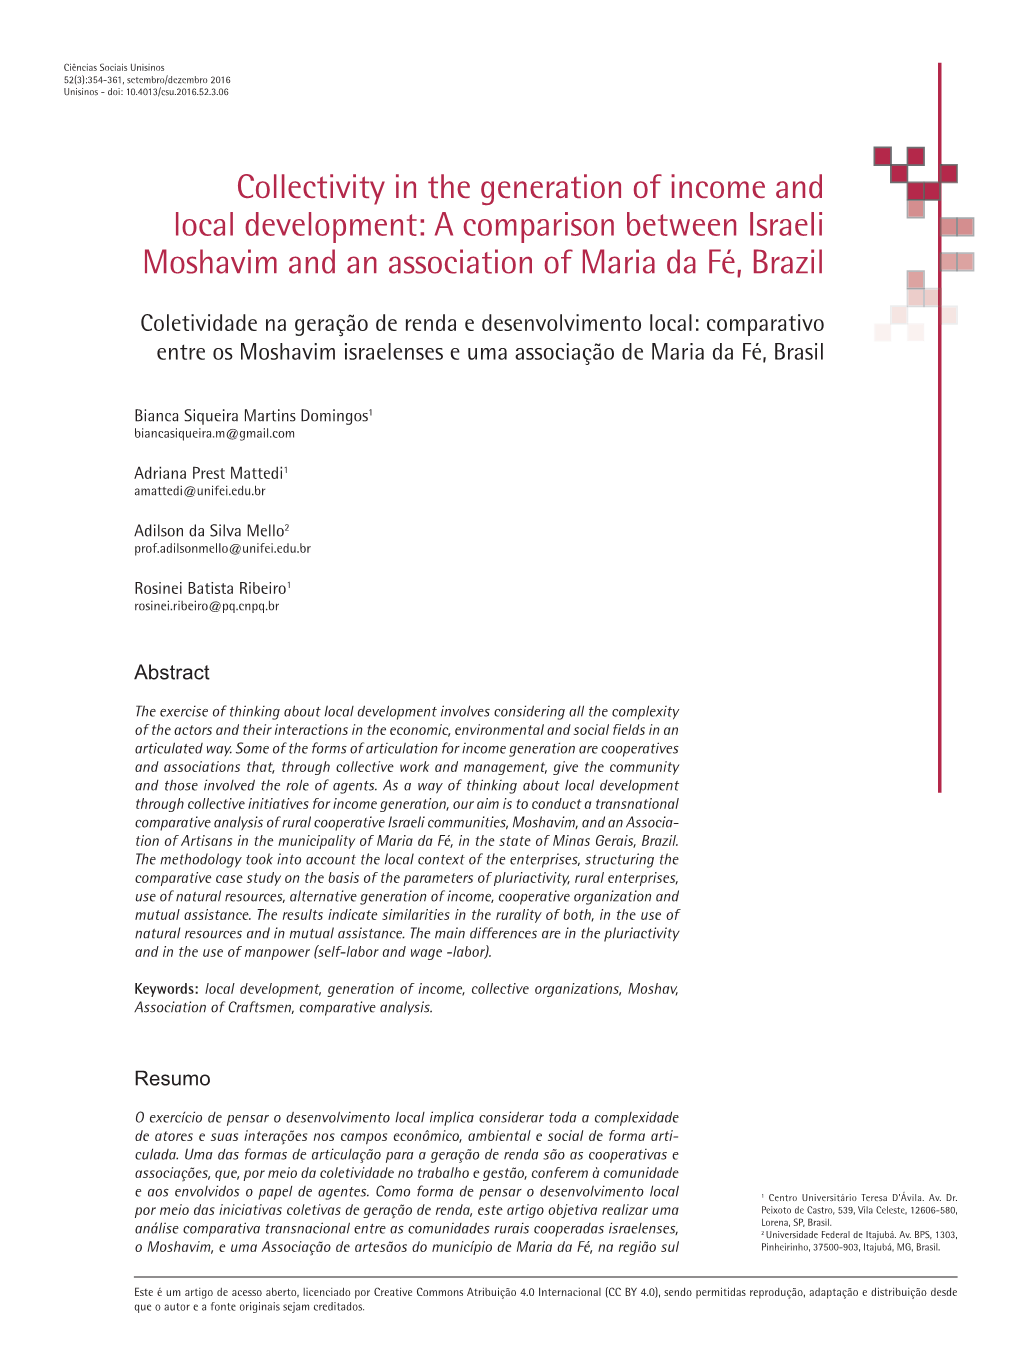 Collectivity in the Generation of Income and Local Development: a Comparison Between Israeli Moshavim and an Association of Maria Da Fé, Brazil